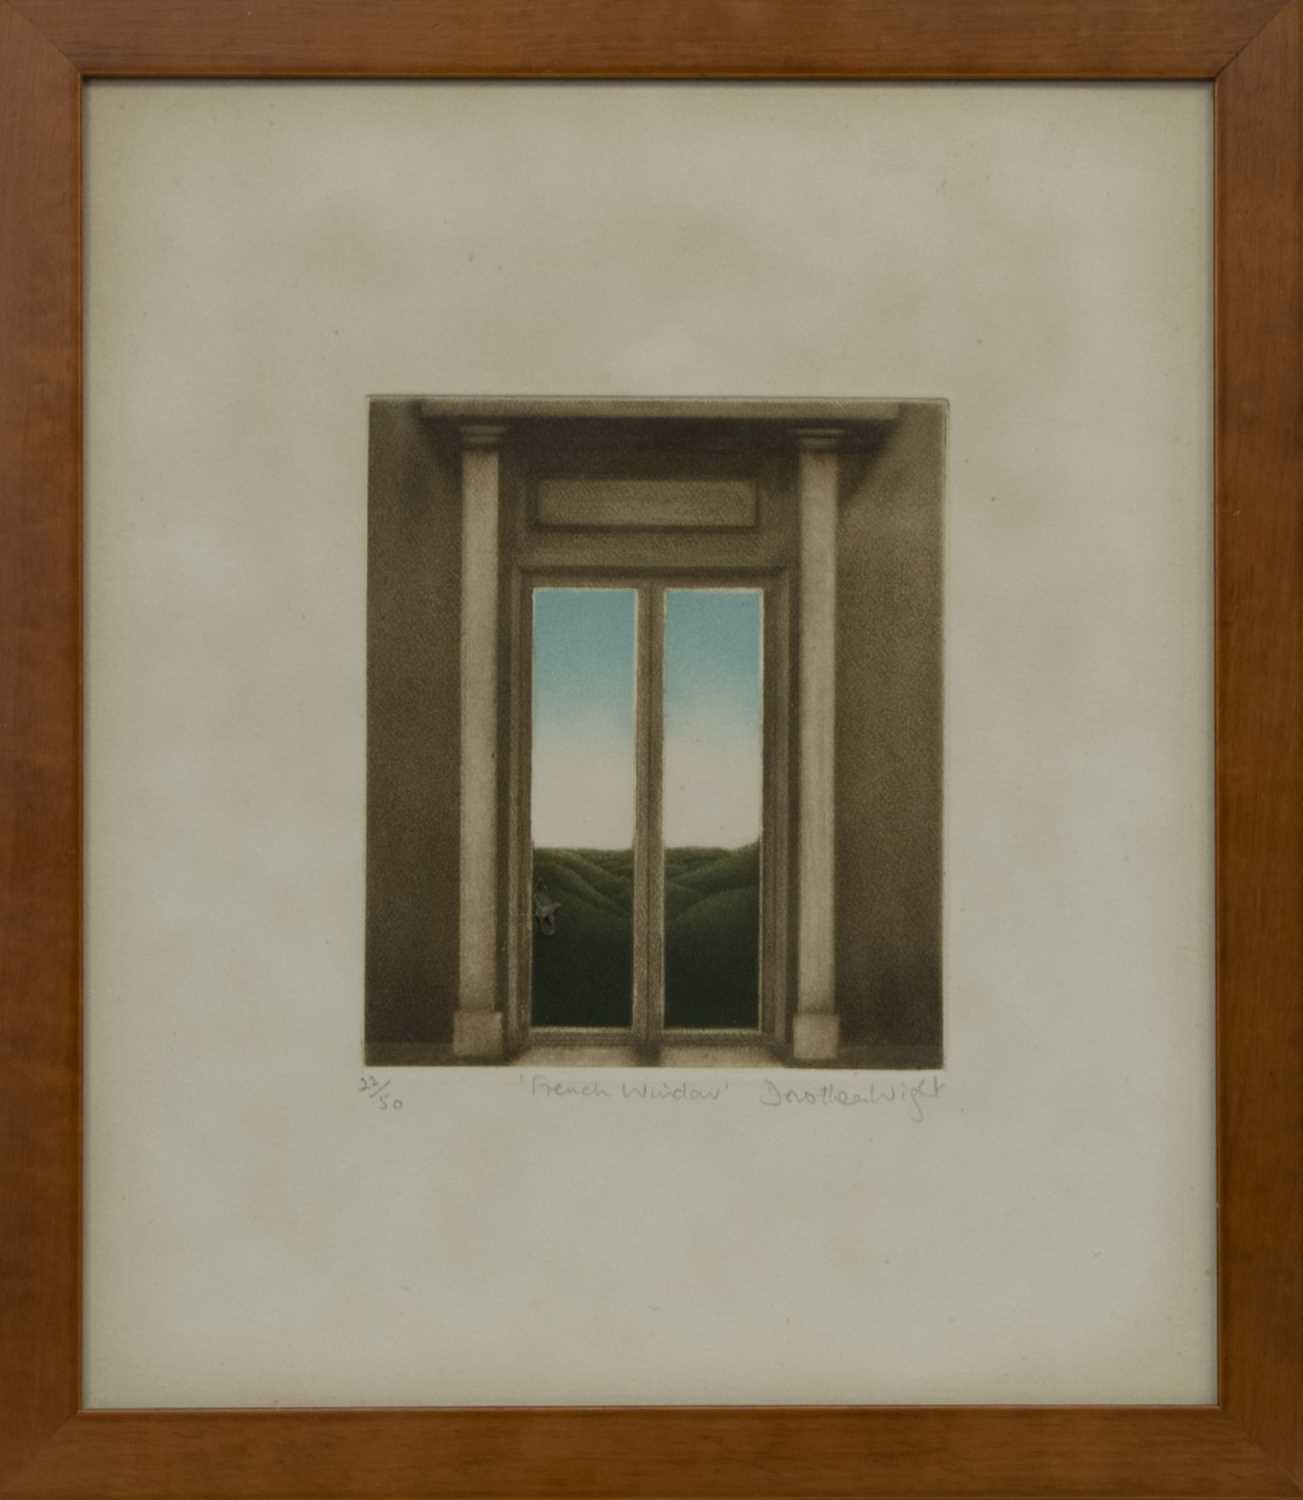 Lot 631 - FRENCH WINDOW, A MEZZOTINT BY DOROTHEA WIGHT